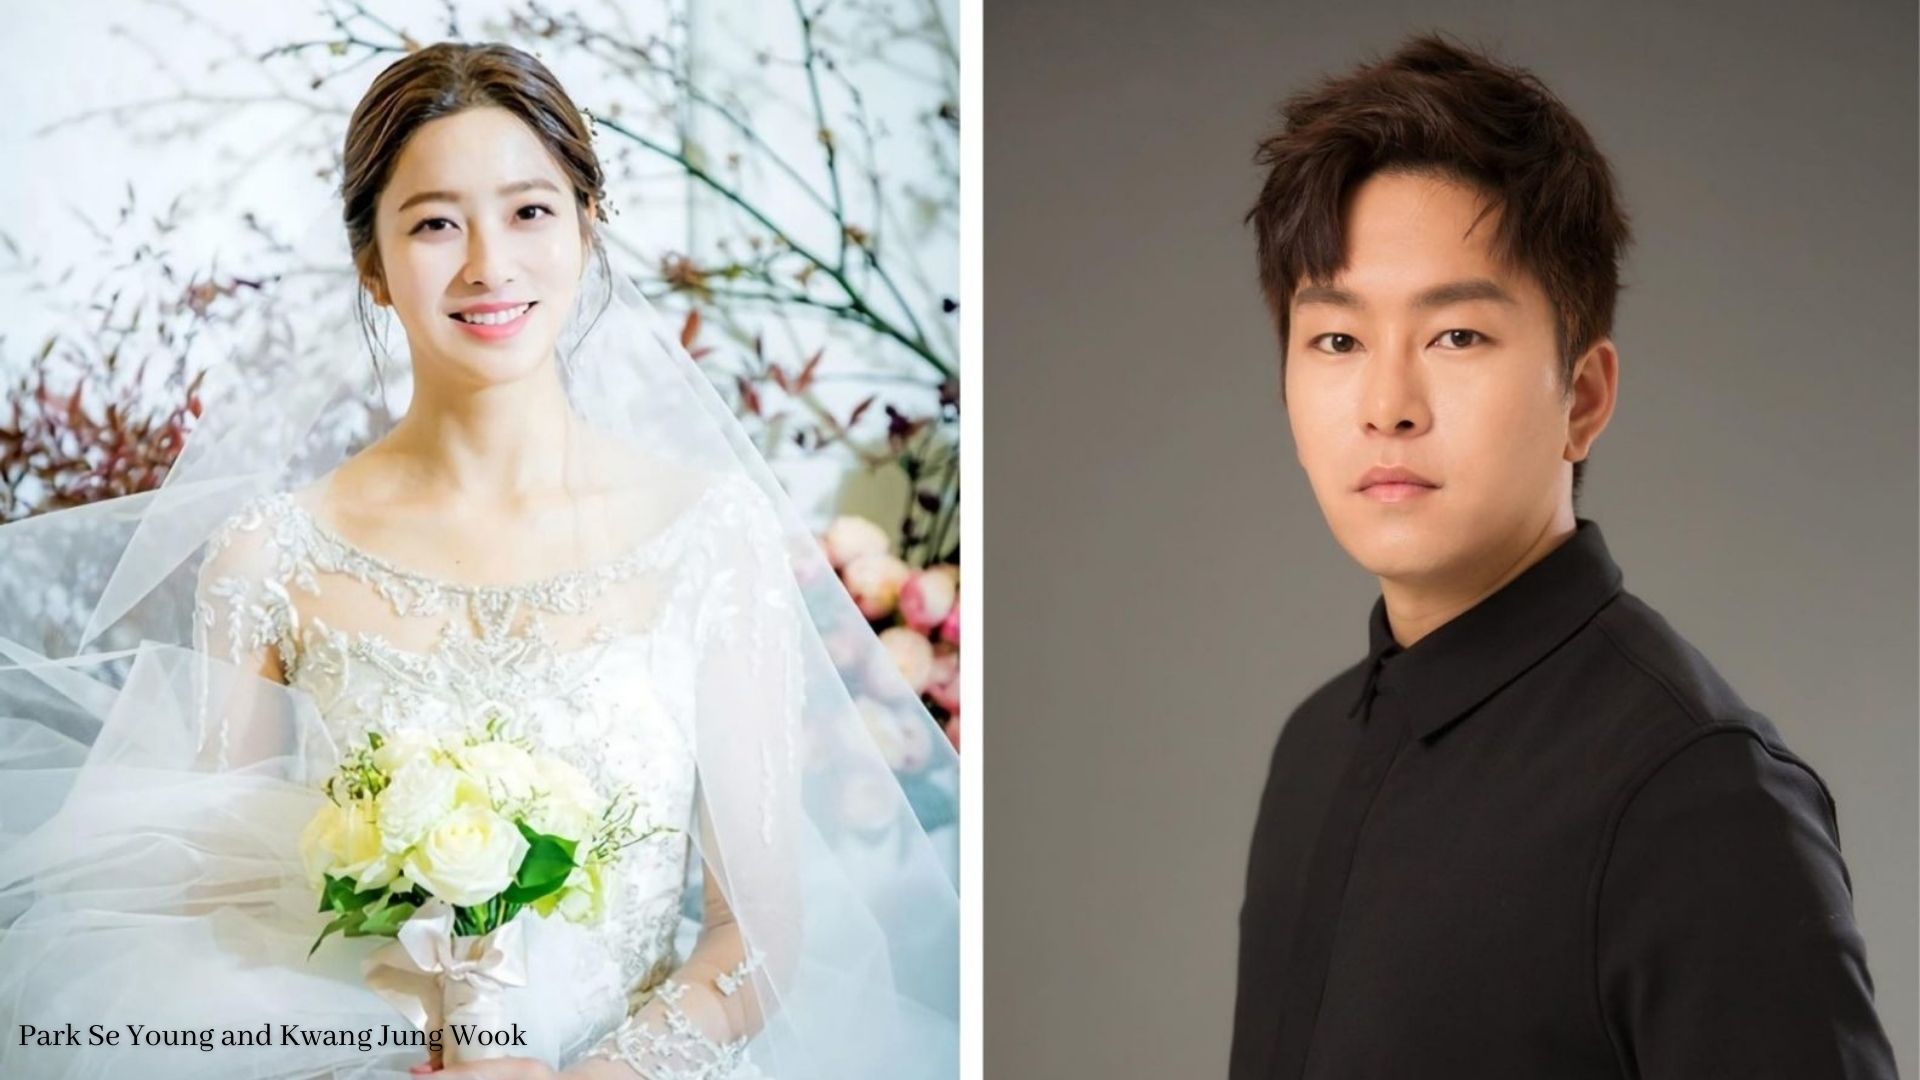 Park Se Young and Kwak Jung Wook: The “School 2013” Co-Stars to Tie Knot in February